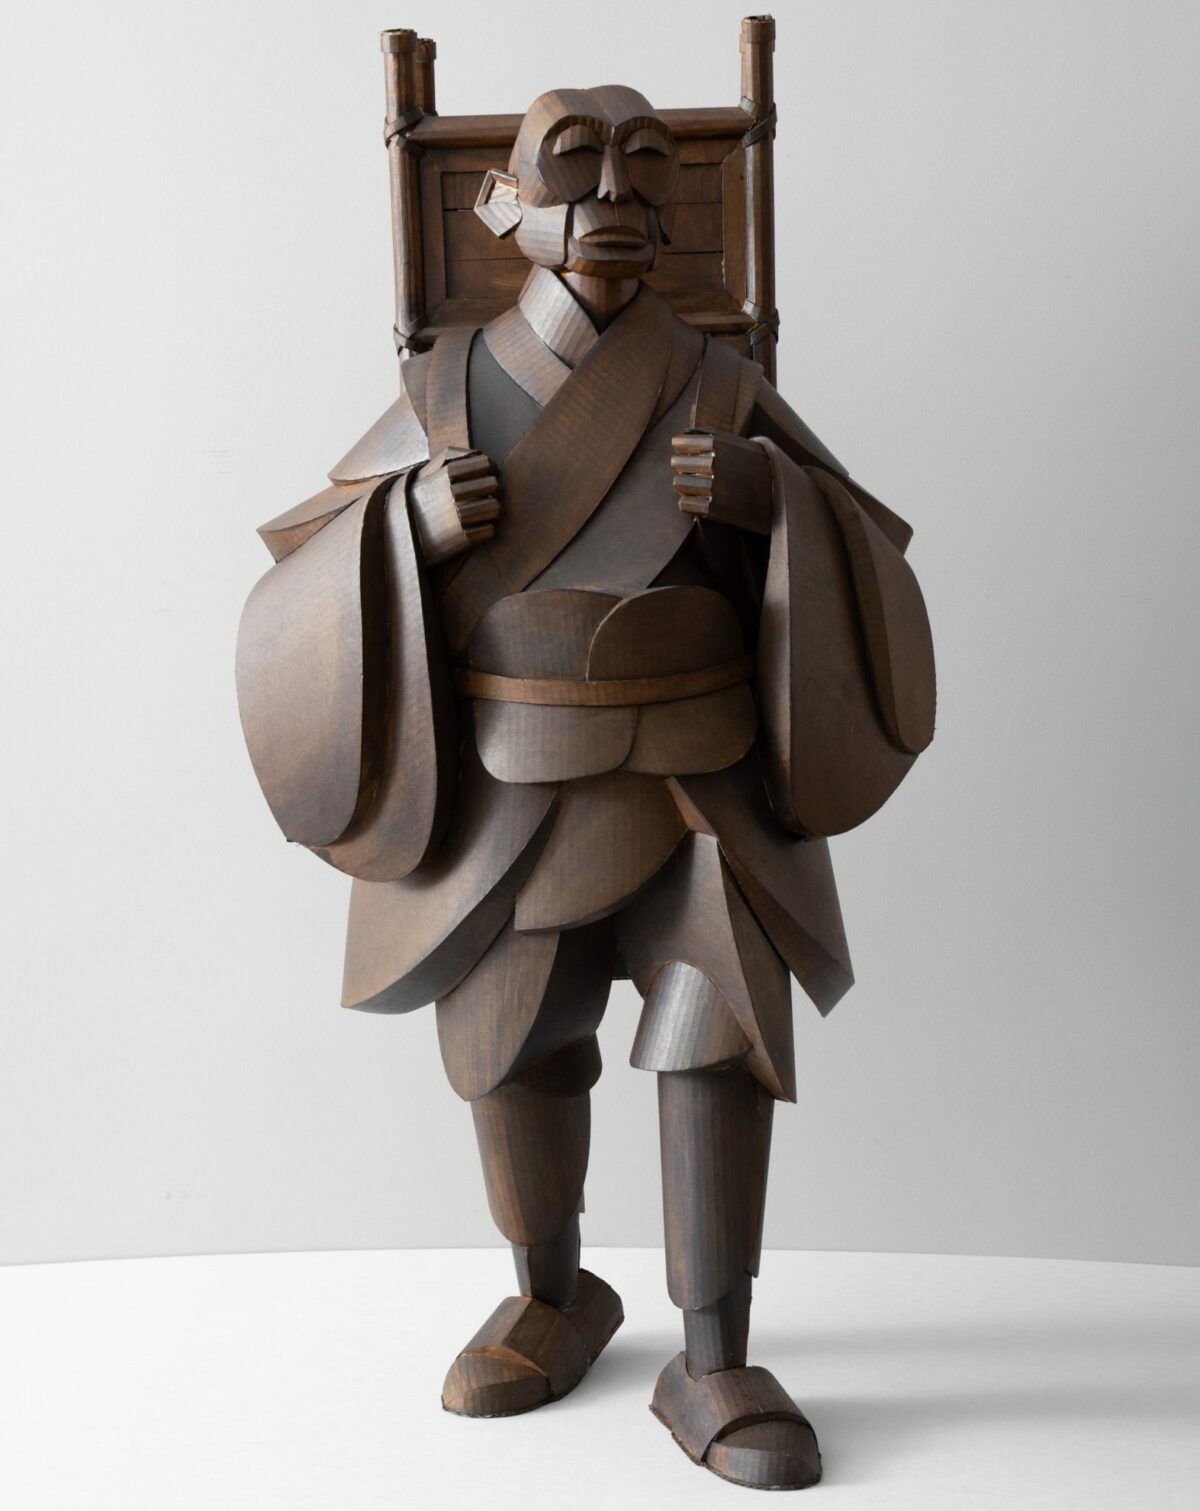 New Figurative Sculptures Made Of Cardboard By Warren King (3)